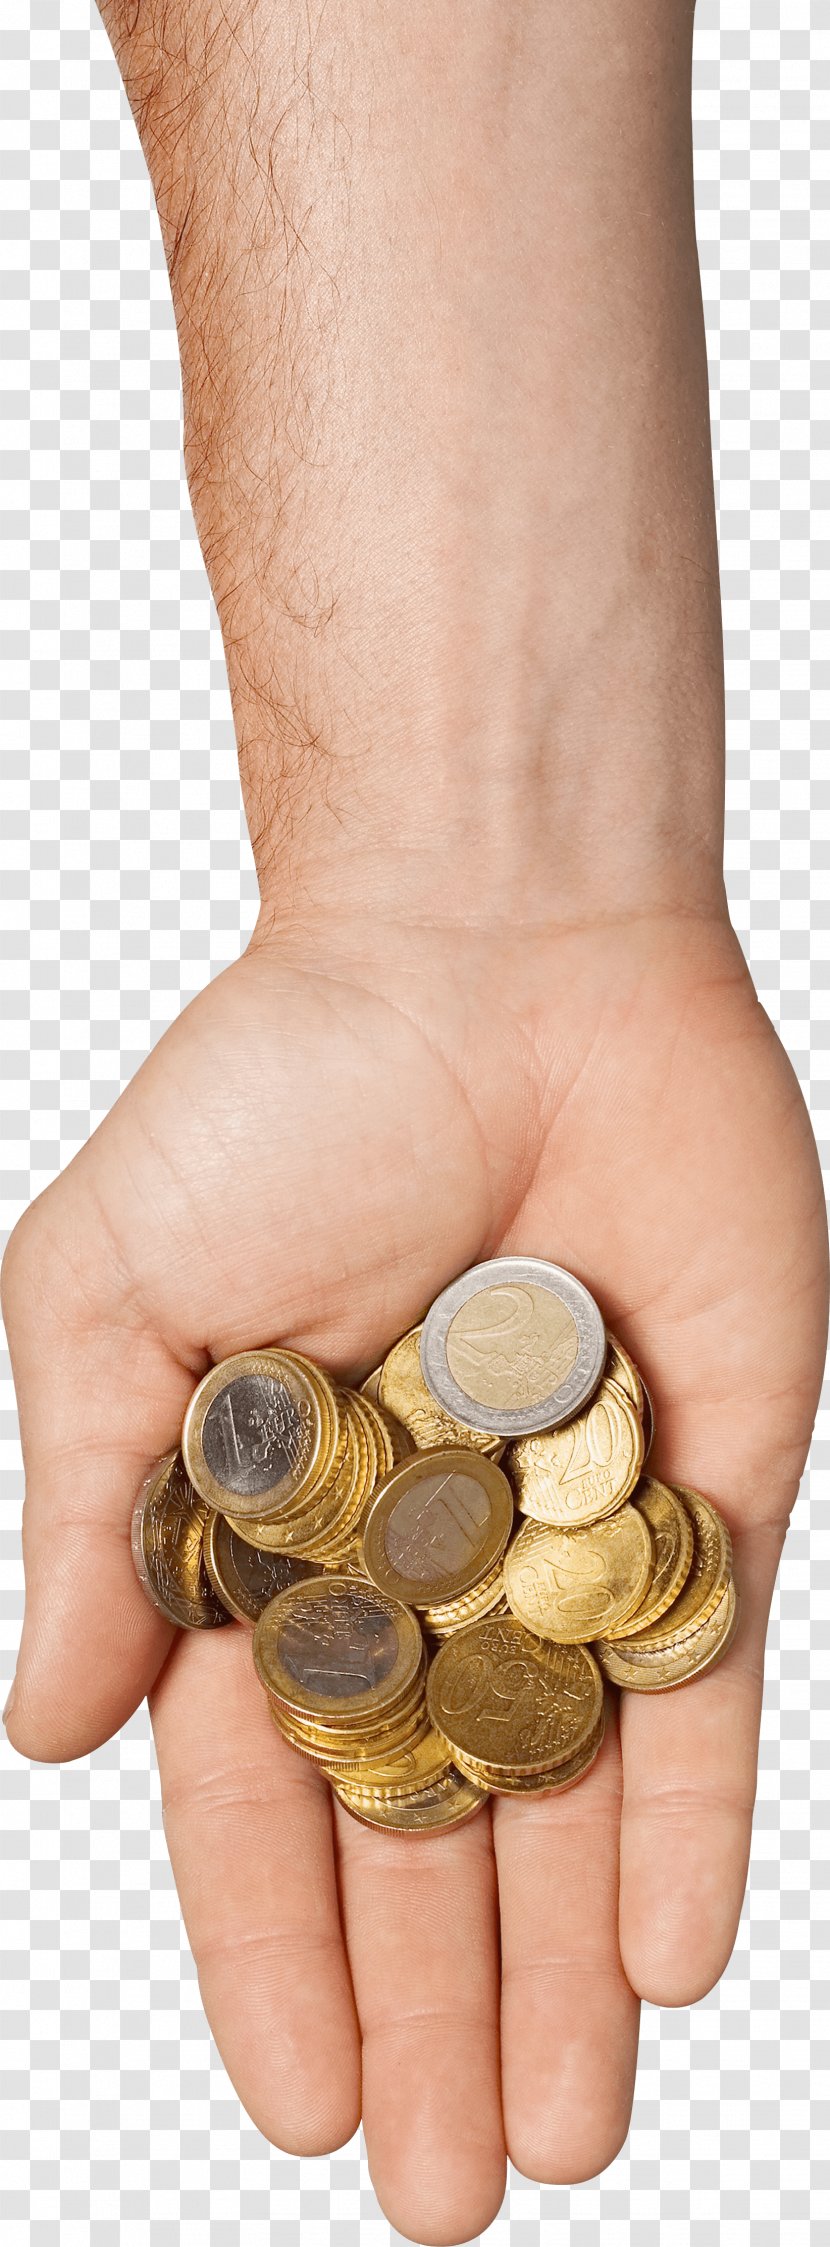 Money Coin - Hand - Coins In Image Transparent PNG